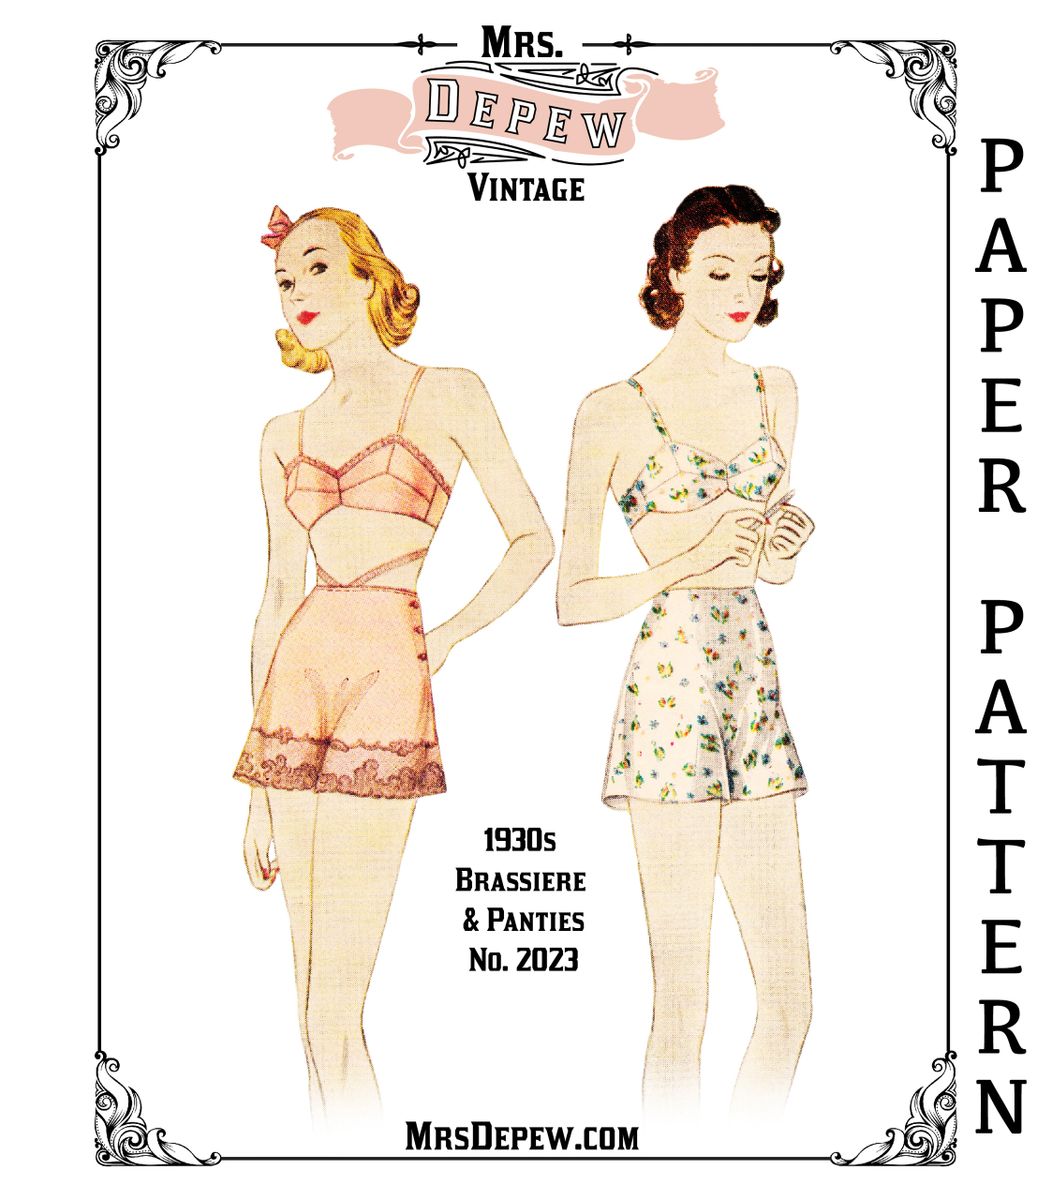 Vintage Sewing Pattern Lingerie Set MultiSize 1930s Bra and Tap Panties 32- 50 Inch Bust #2023 - PAPER PATTERN